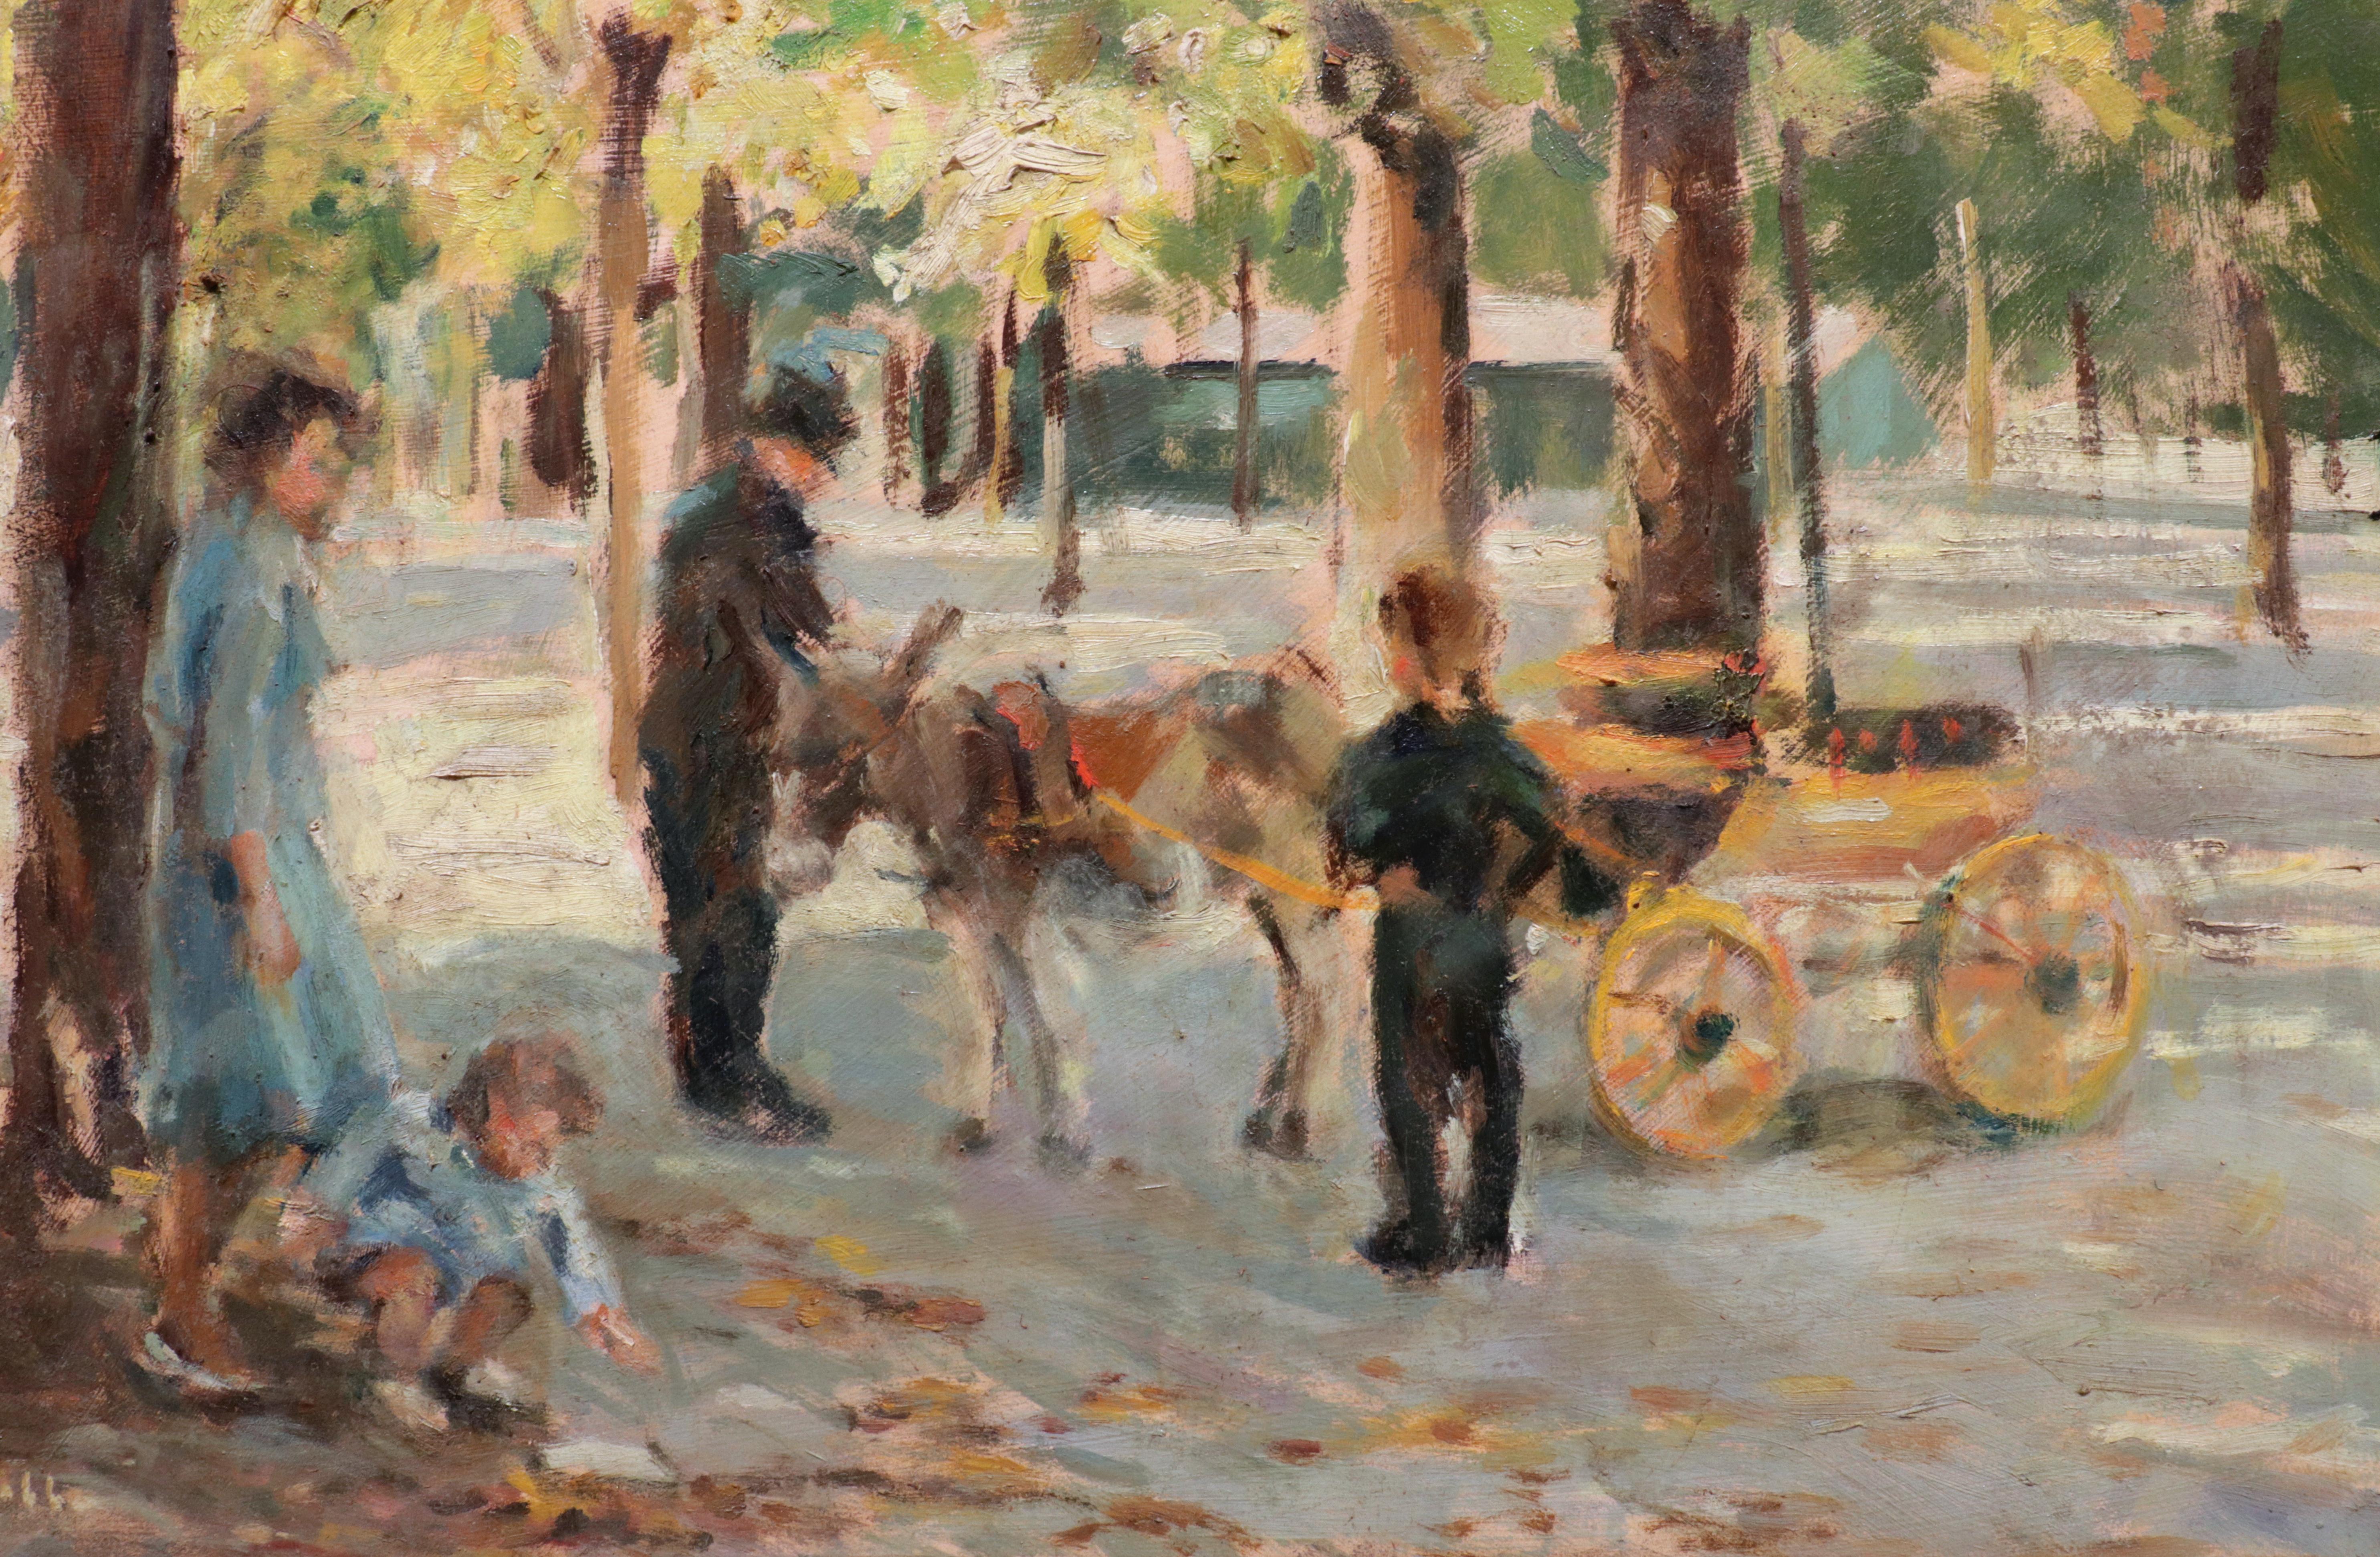 PARK SCENE by Marie Stobbe, American Impressionist, Central Park, NYC 4